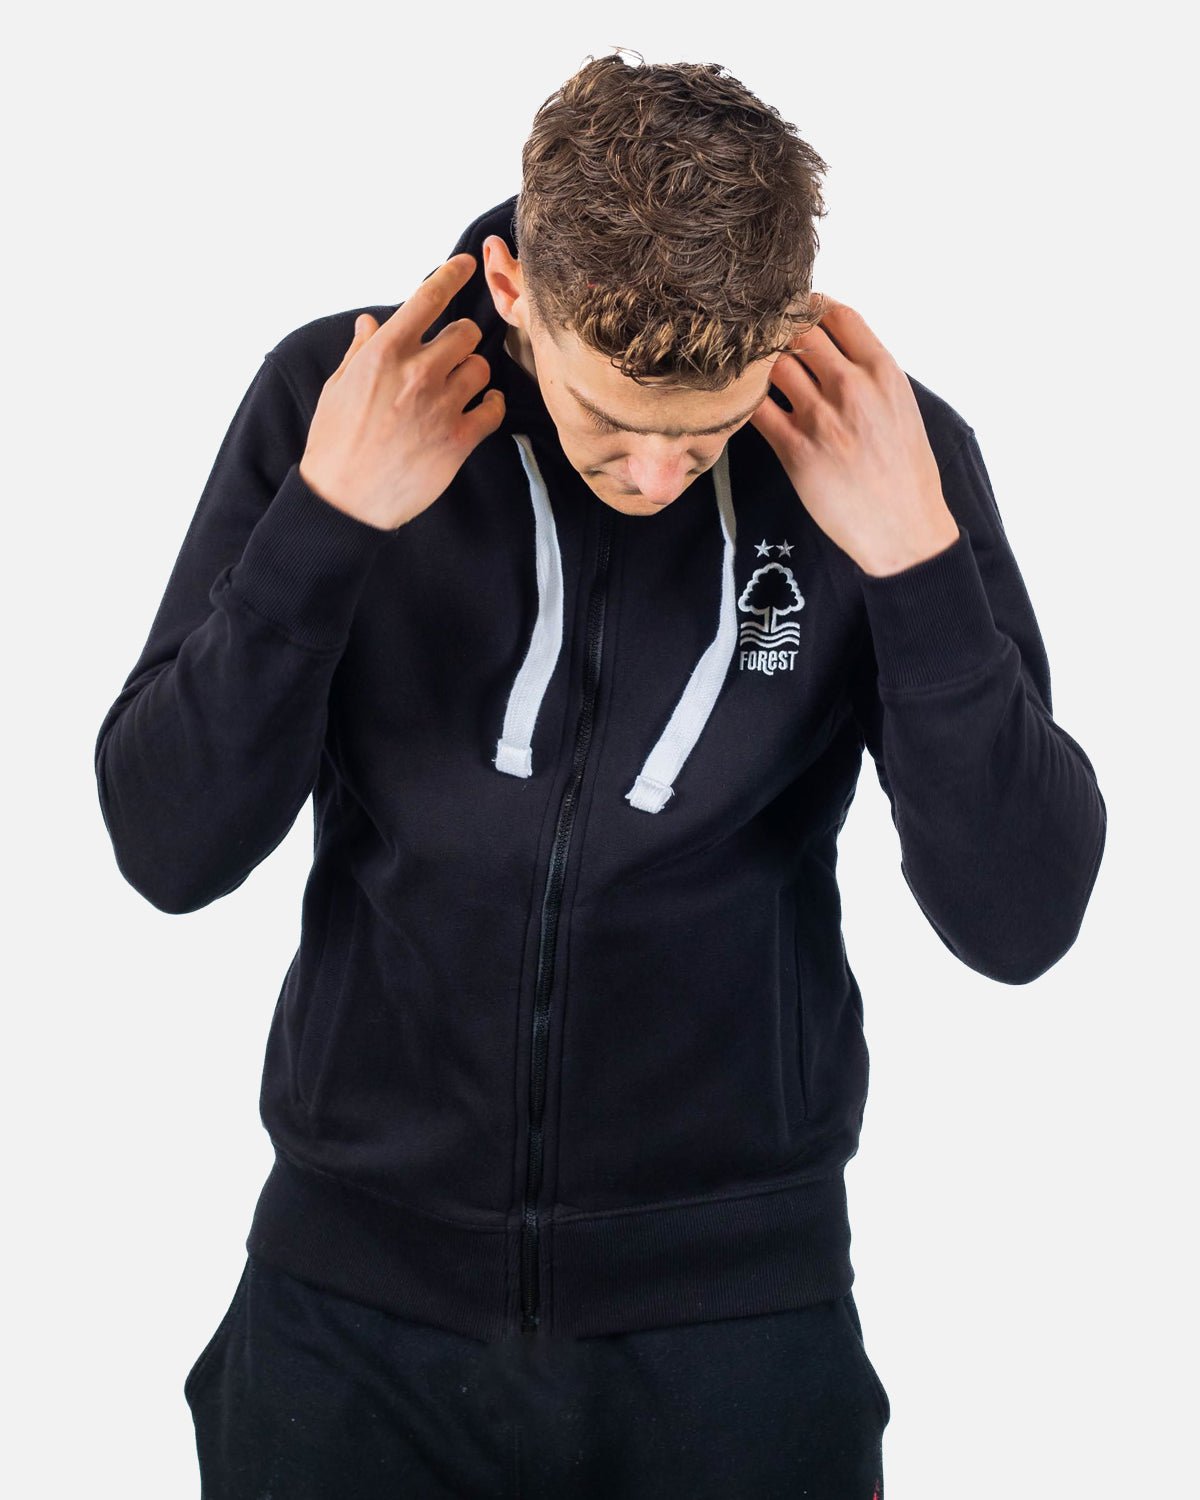 NFFC Adults Black Full Zip Hoodie - Nottingham Forest FC